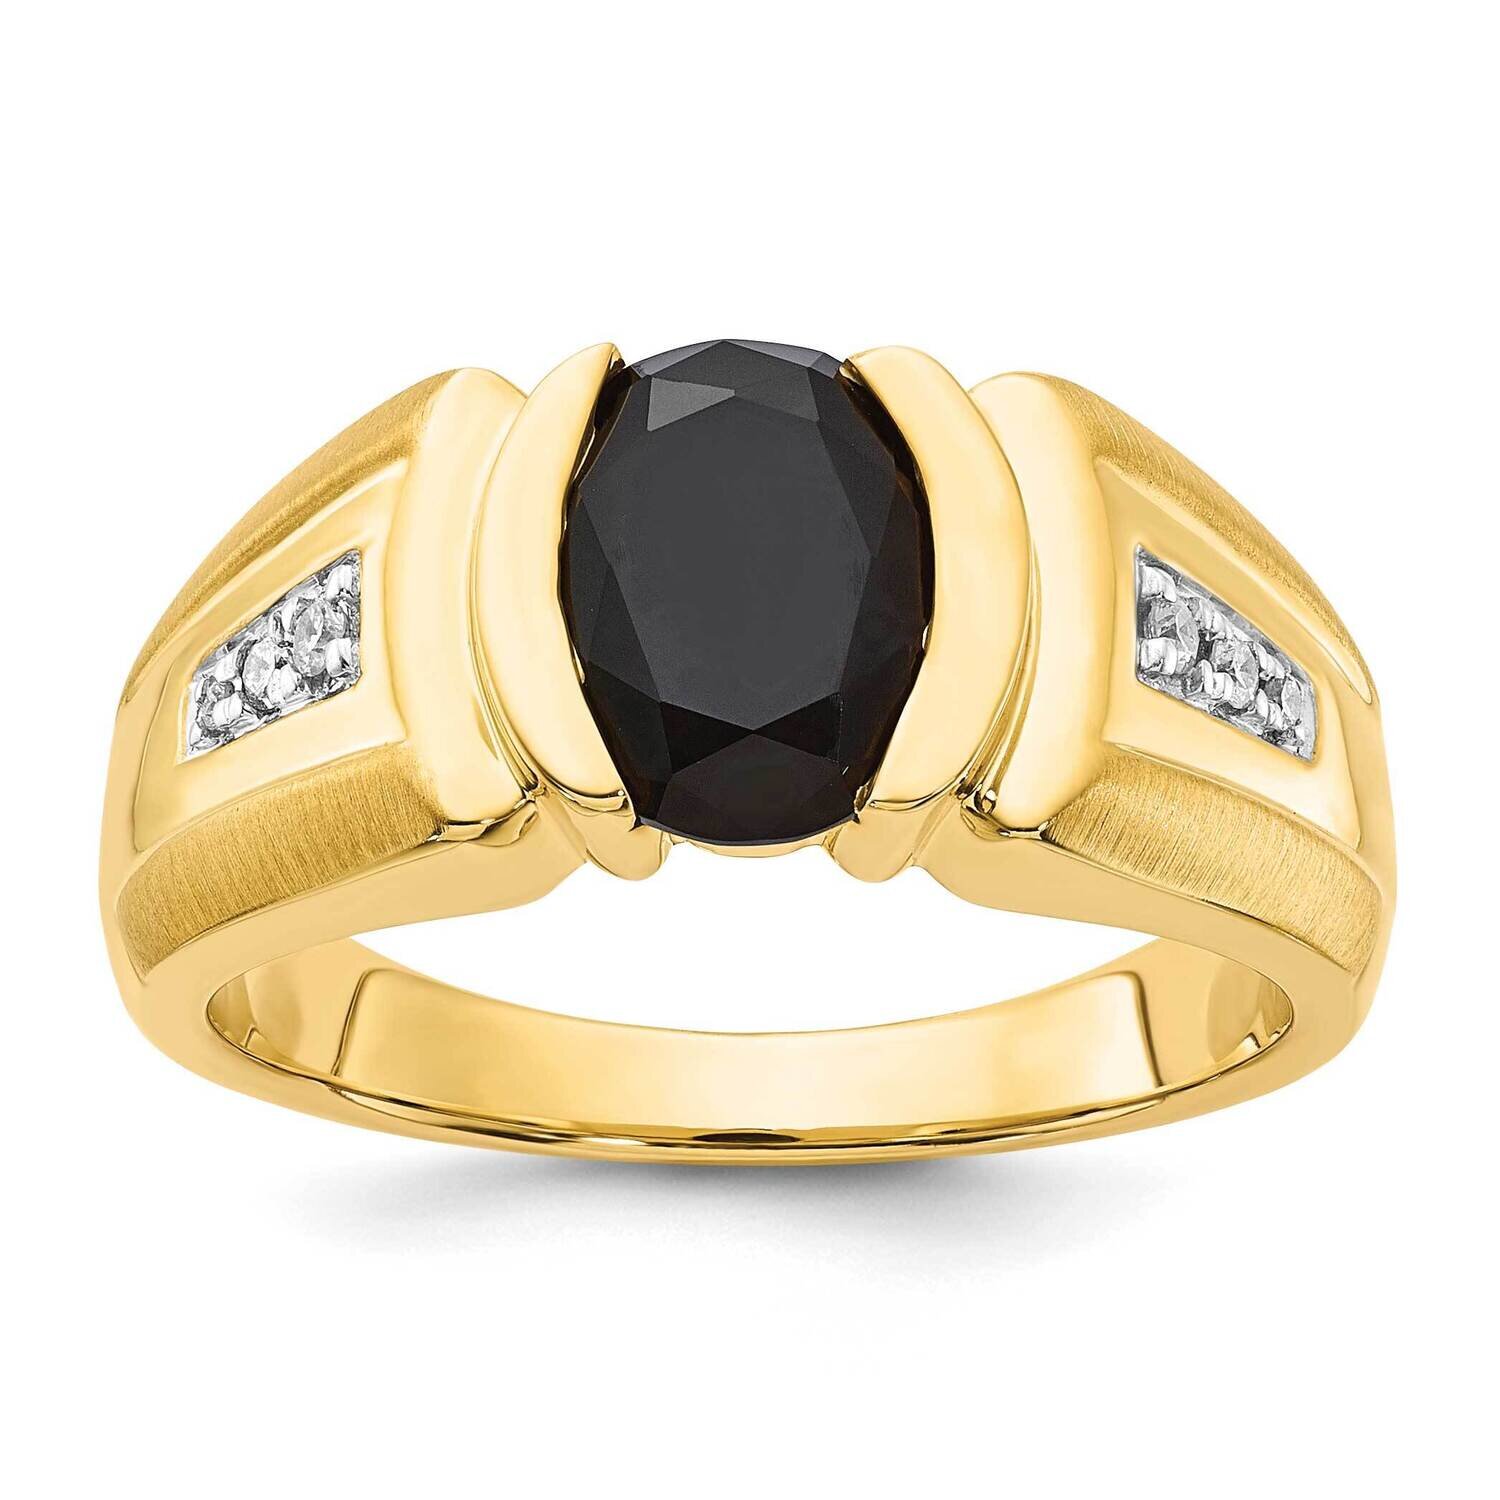 10k Gold Gold Polished & Brushed Diamond & Onyx Ring RMS1609/FACOX-0YAAB